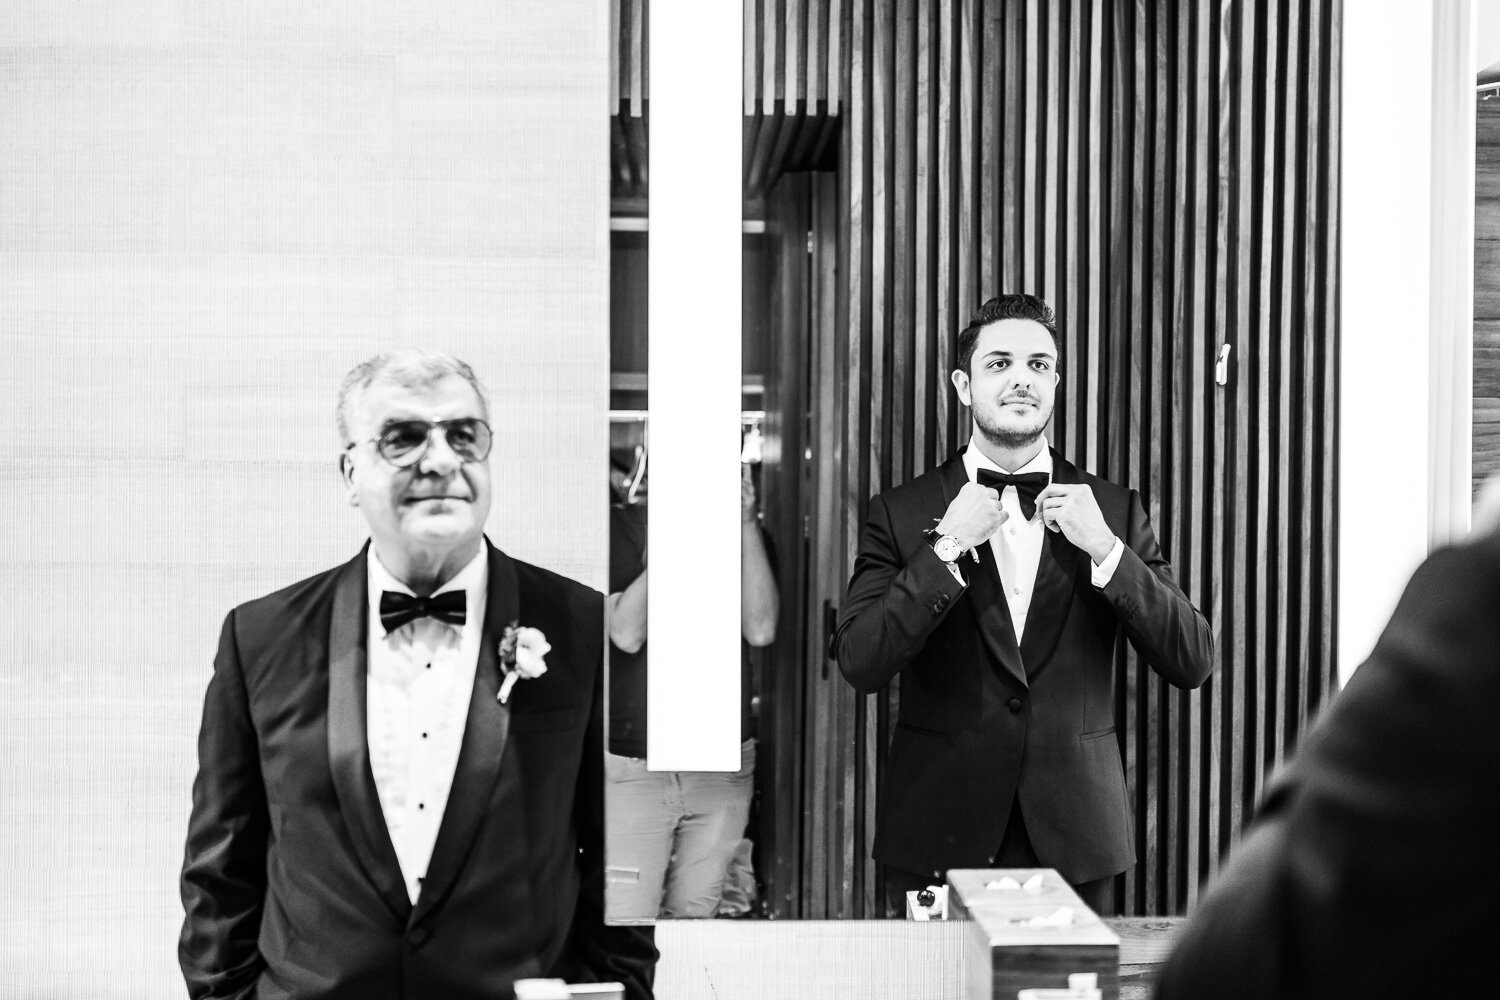 Groom getting ready in front of the mirrow with his father, GVphotographer (Copy)